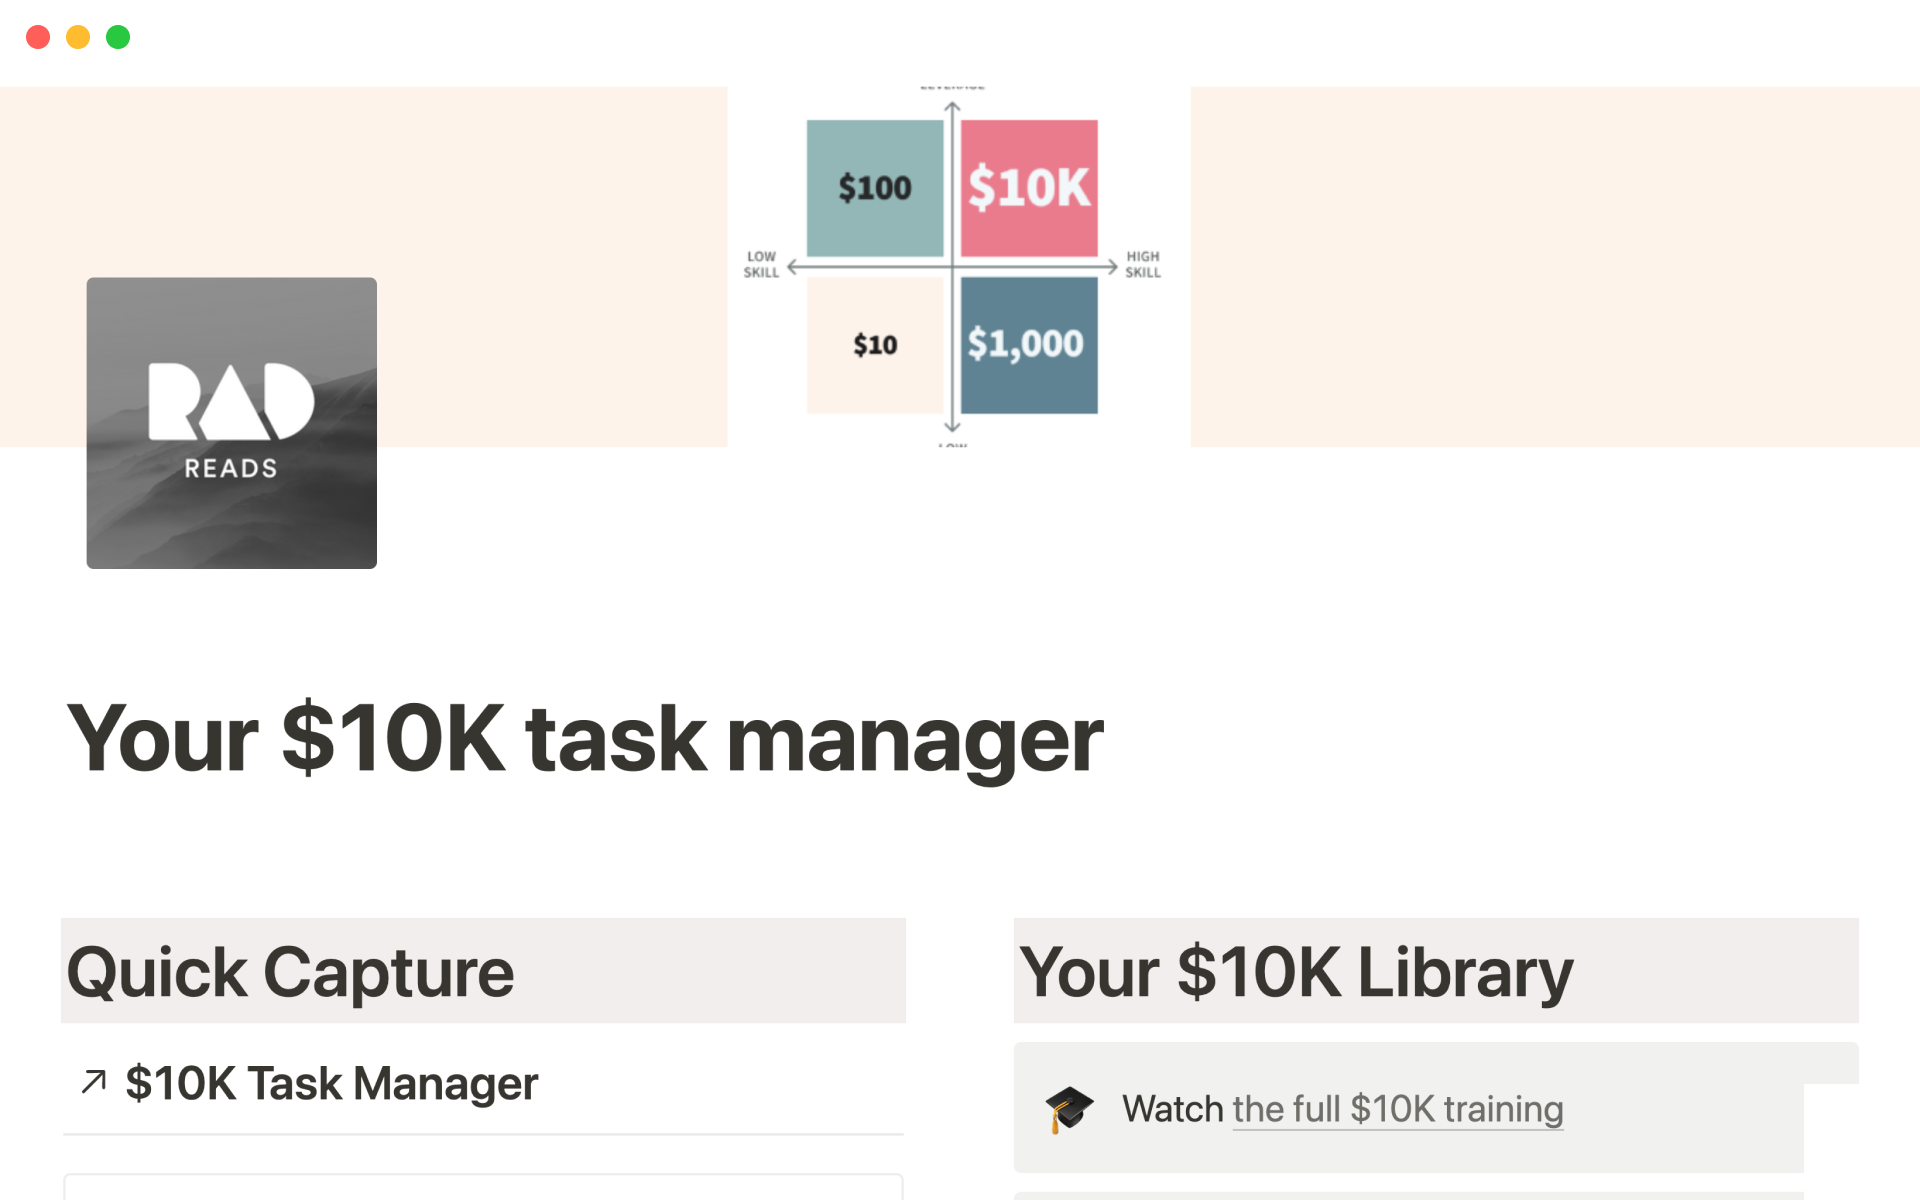 Use this $10K Task Manager to identify your priorities and achieve your goals.